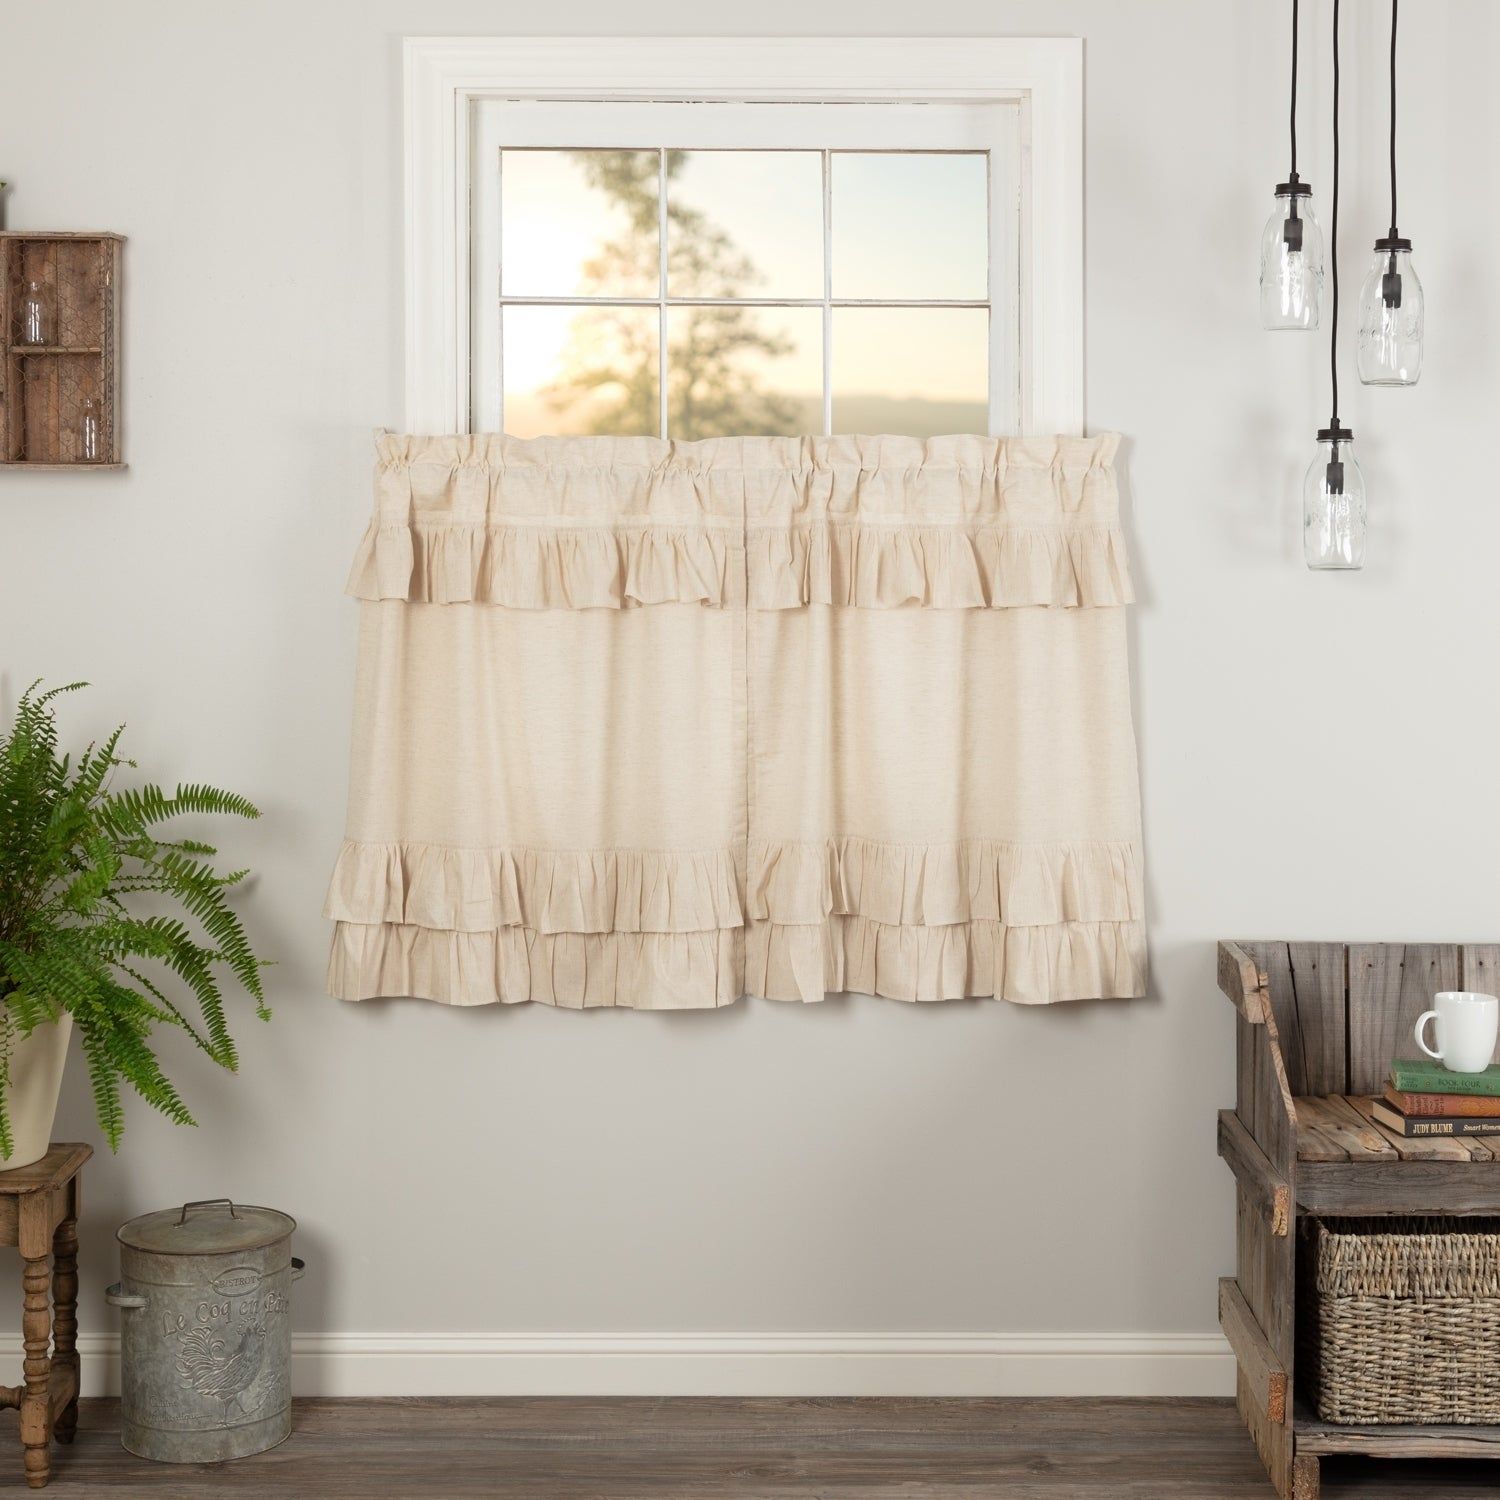 Farmhouse Kitchen Curtains Vhc Simple Life Flax Tier Pair Rod Pocket Cotton  Linen Blend Solid Color Flax Intended For Farmhouse Kitchen Curtains (Photo 6 of 20)